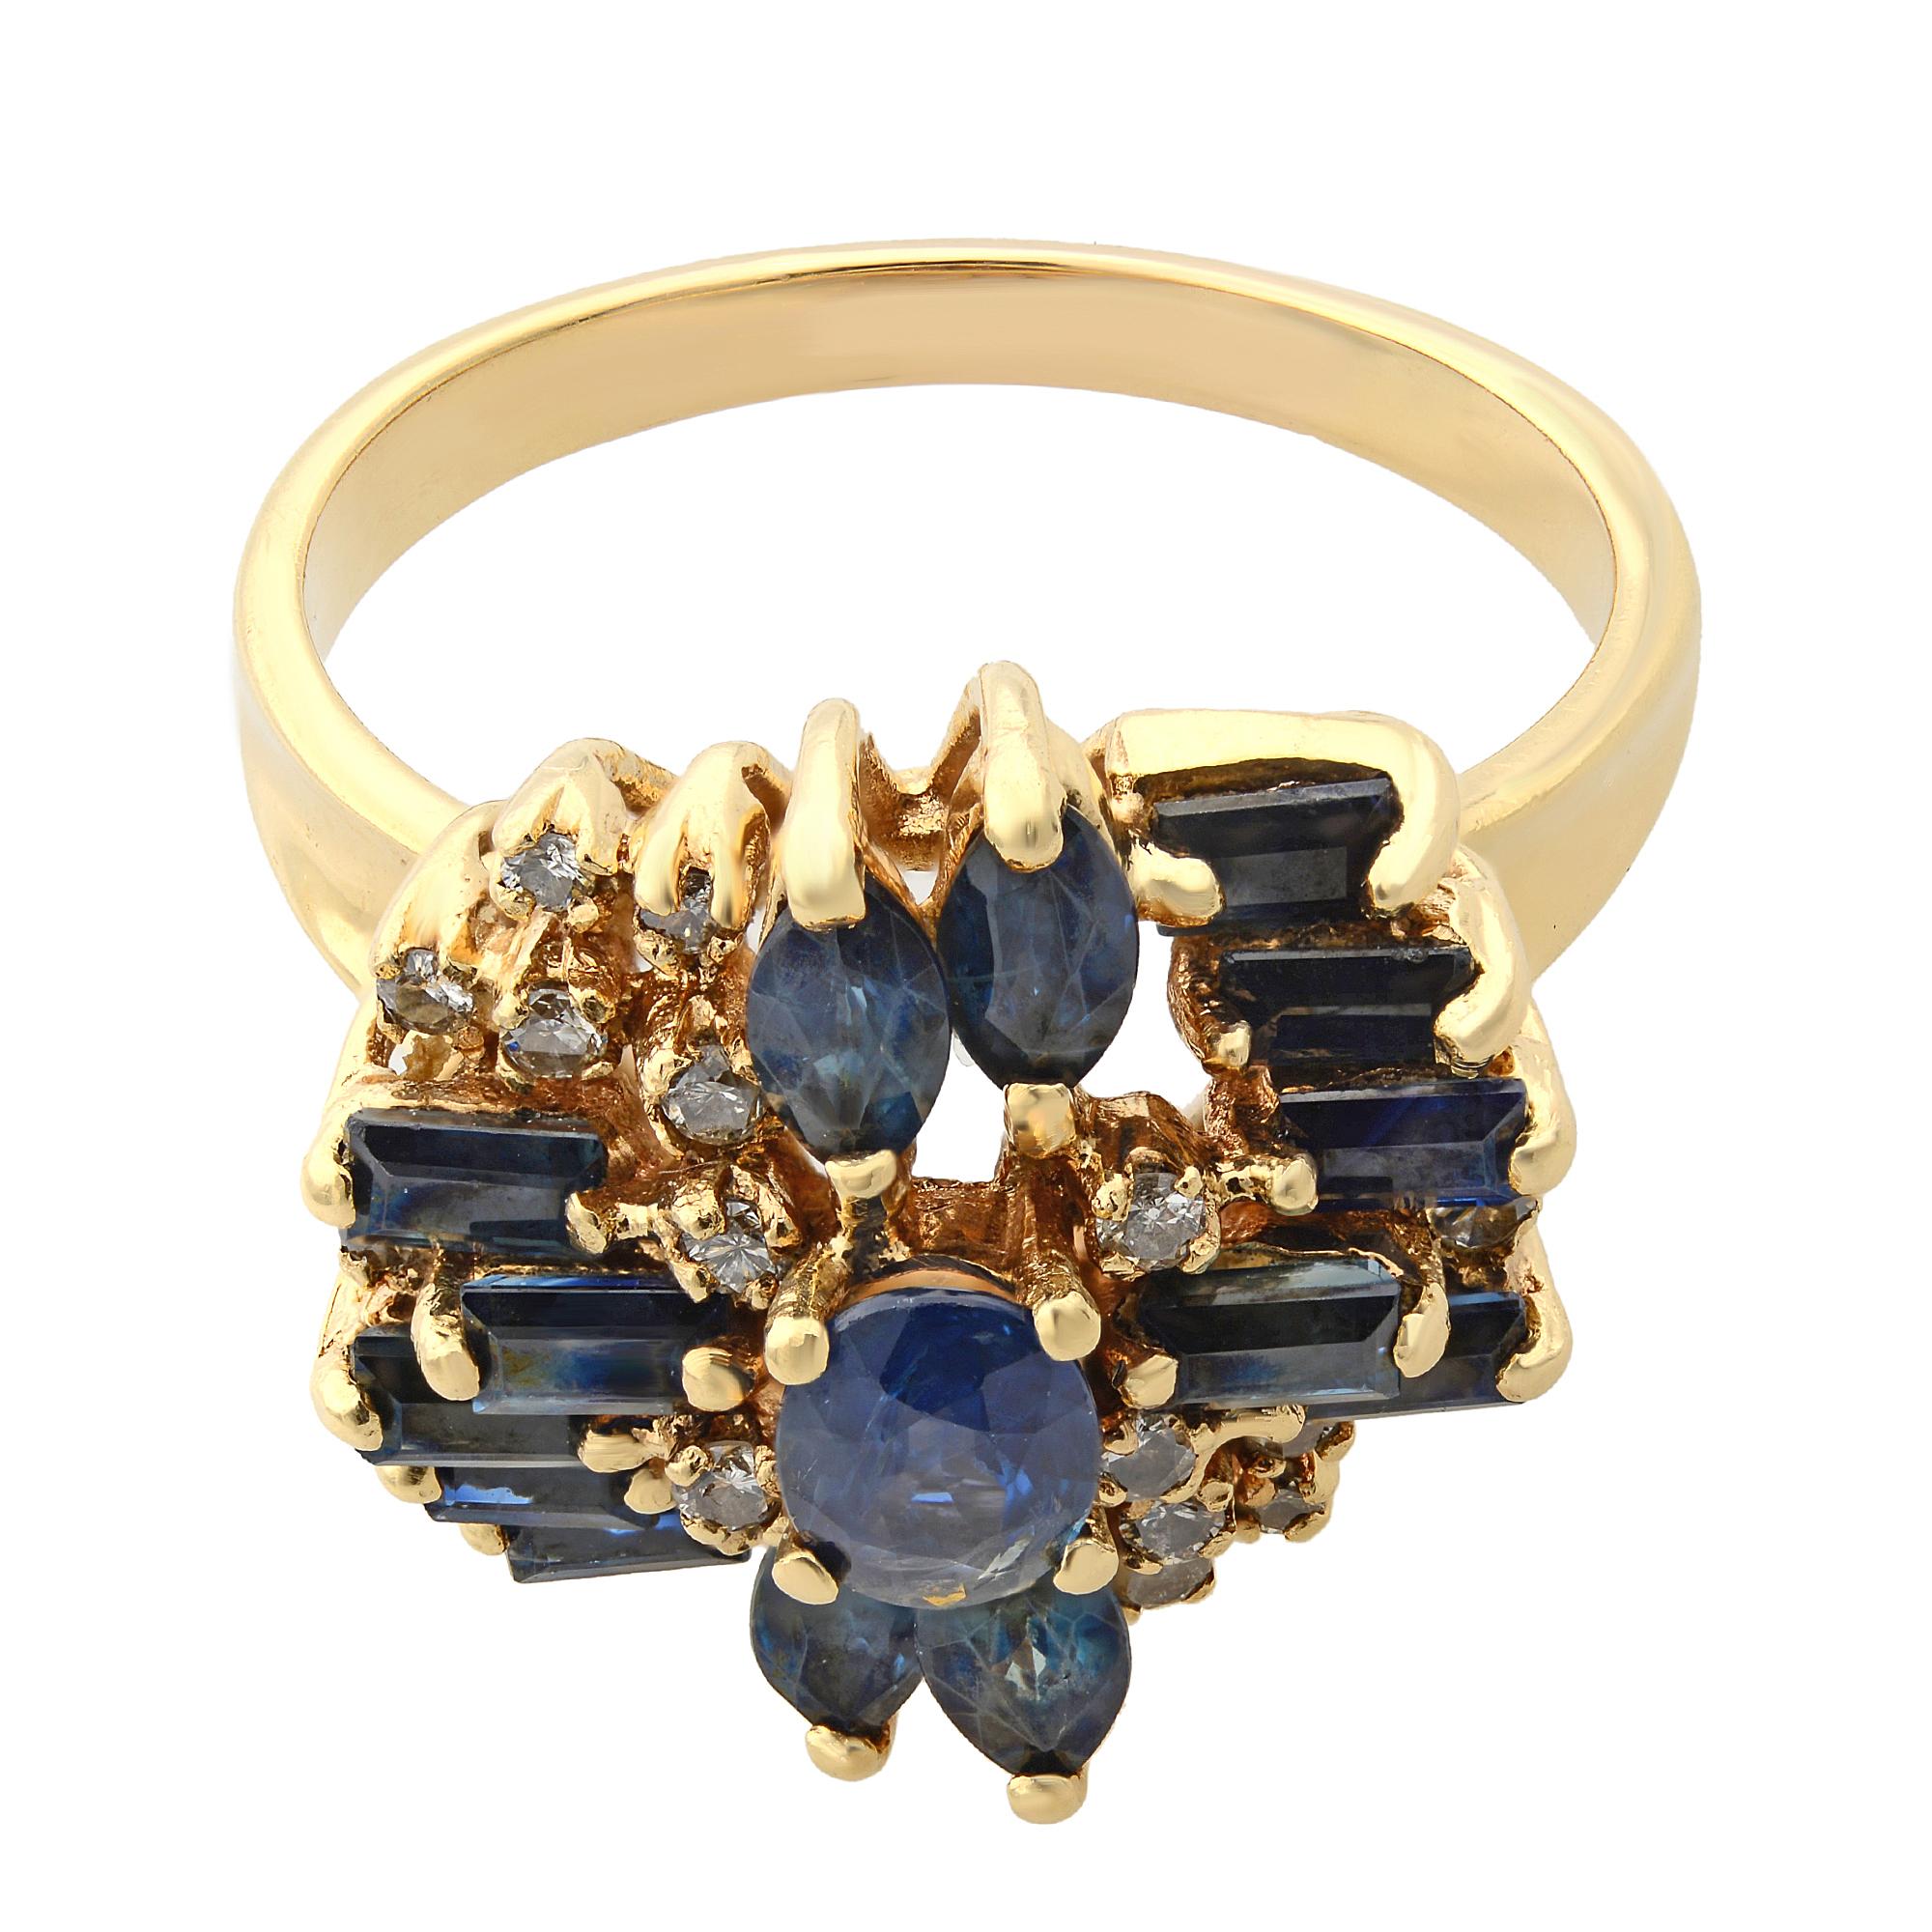 This ring beautiful cocktail ring is set with 2.00cttw of Blue Sapphires and 0.20cttw of tiny round cut diamonds. The ring is crafted in 14k yellow gold. Ring size 8. Comes with a presentable gift box. 
